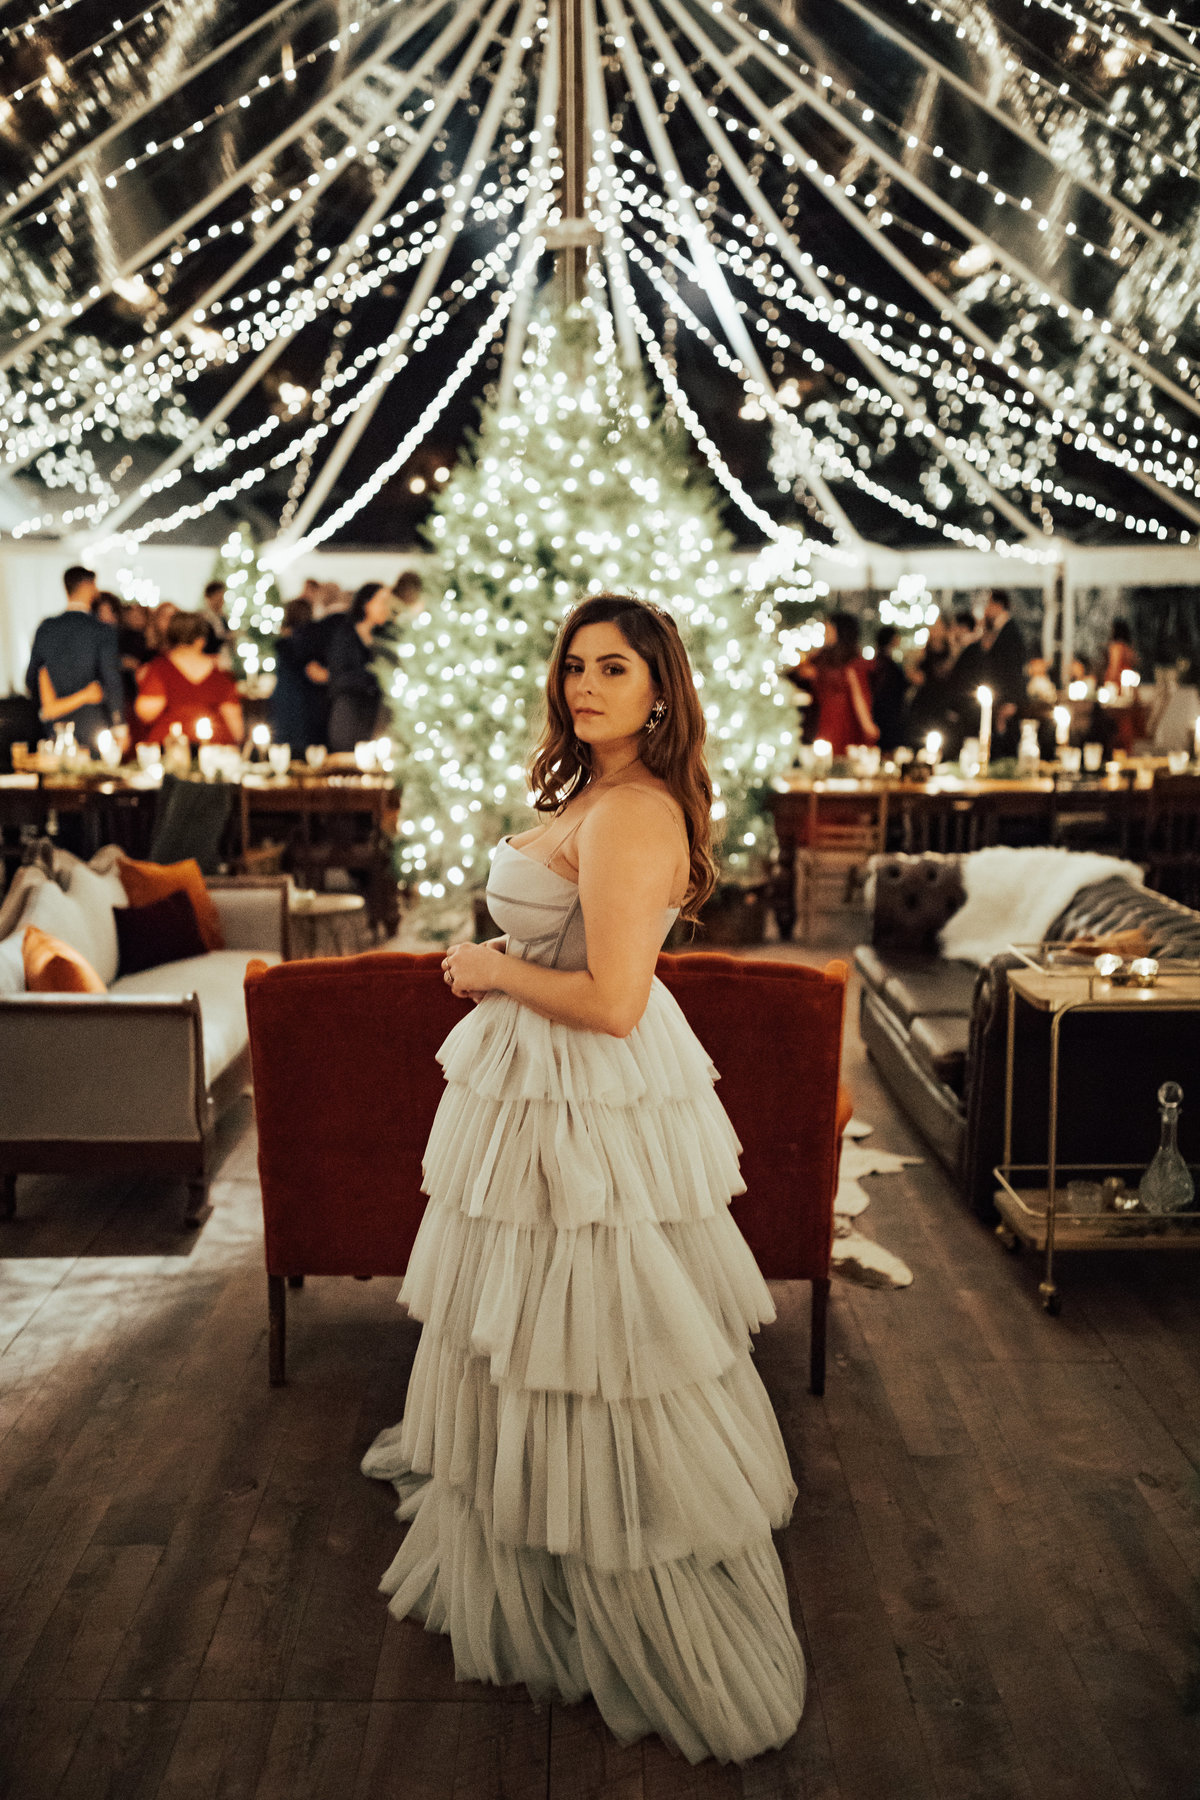 Christy-l-Johnston-Photography-Monica-Relyea-Events-Noelle-Downing-Instagram-Noelle_s-Favorite-Day-Wedding-Battenfelds-Christmas-tree-farm-Red-Hook-New-York-Hudson-Valley-upstate-november-2019-AP1A0446